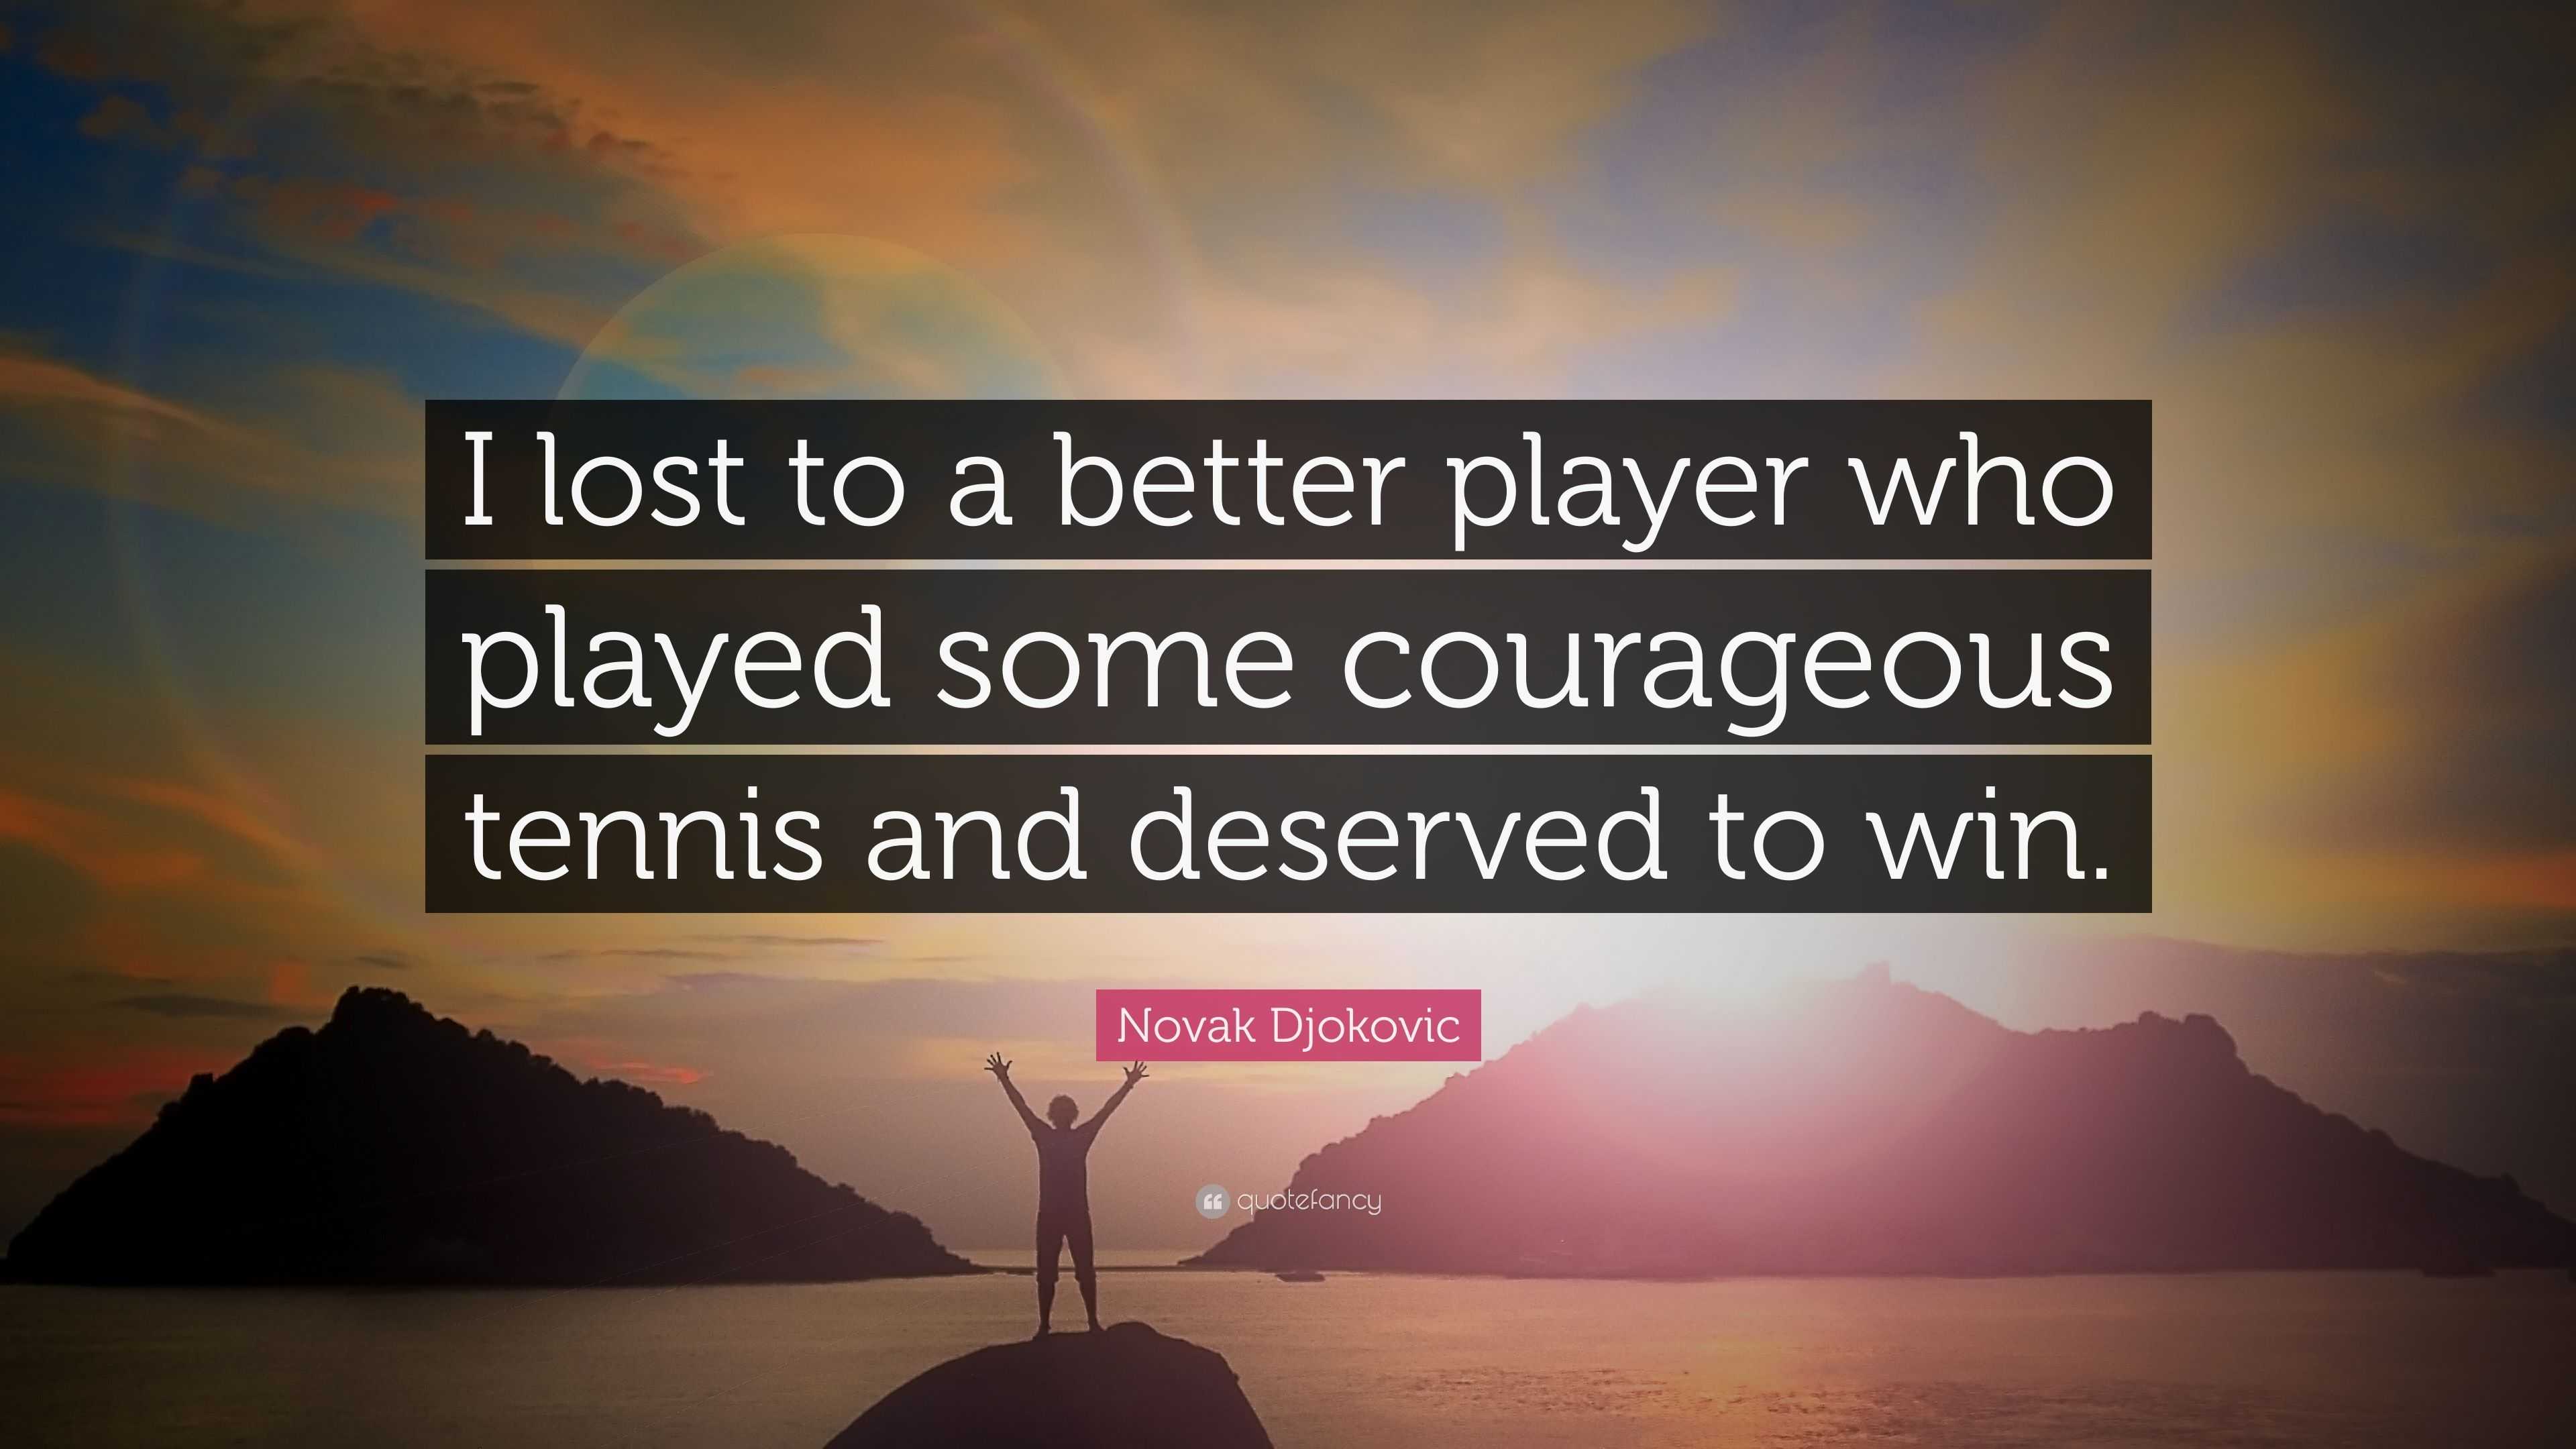 Novak Djokovic Quote: "I lost to a better player who ...